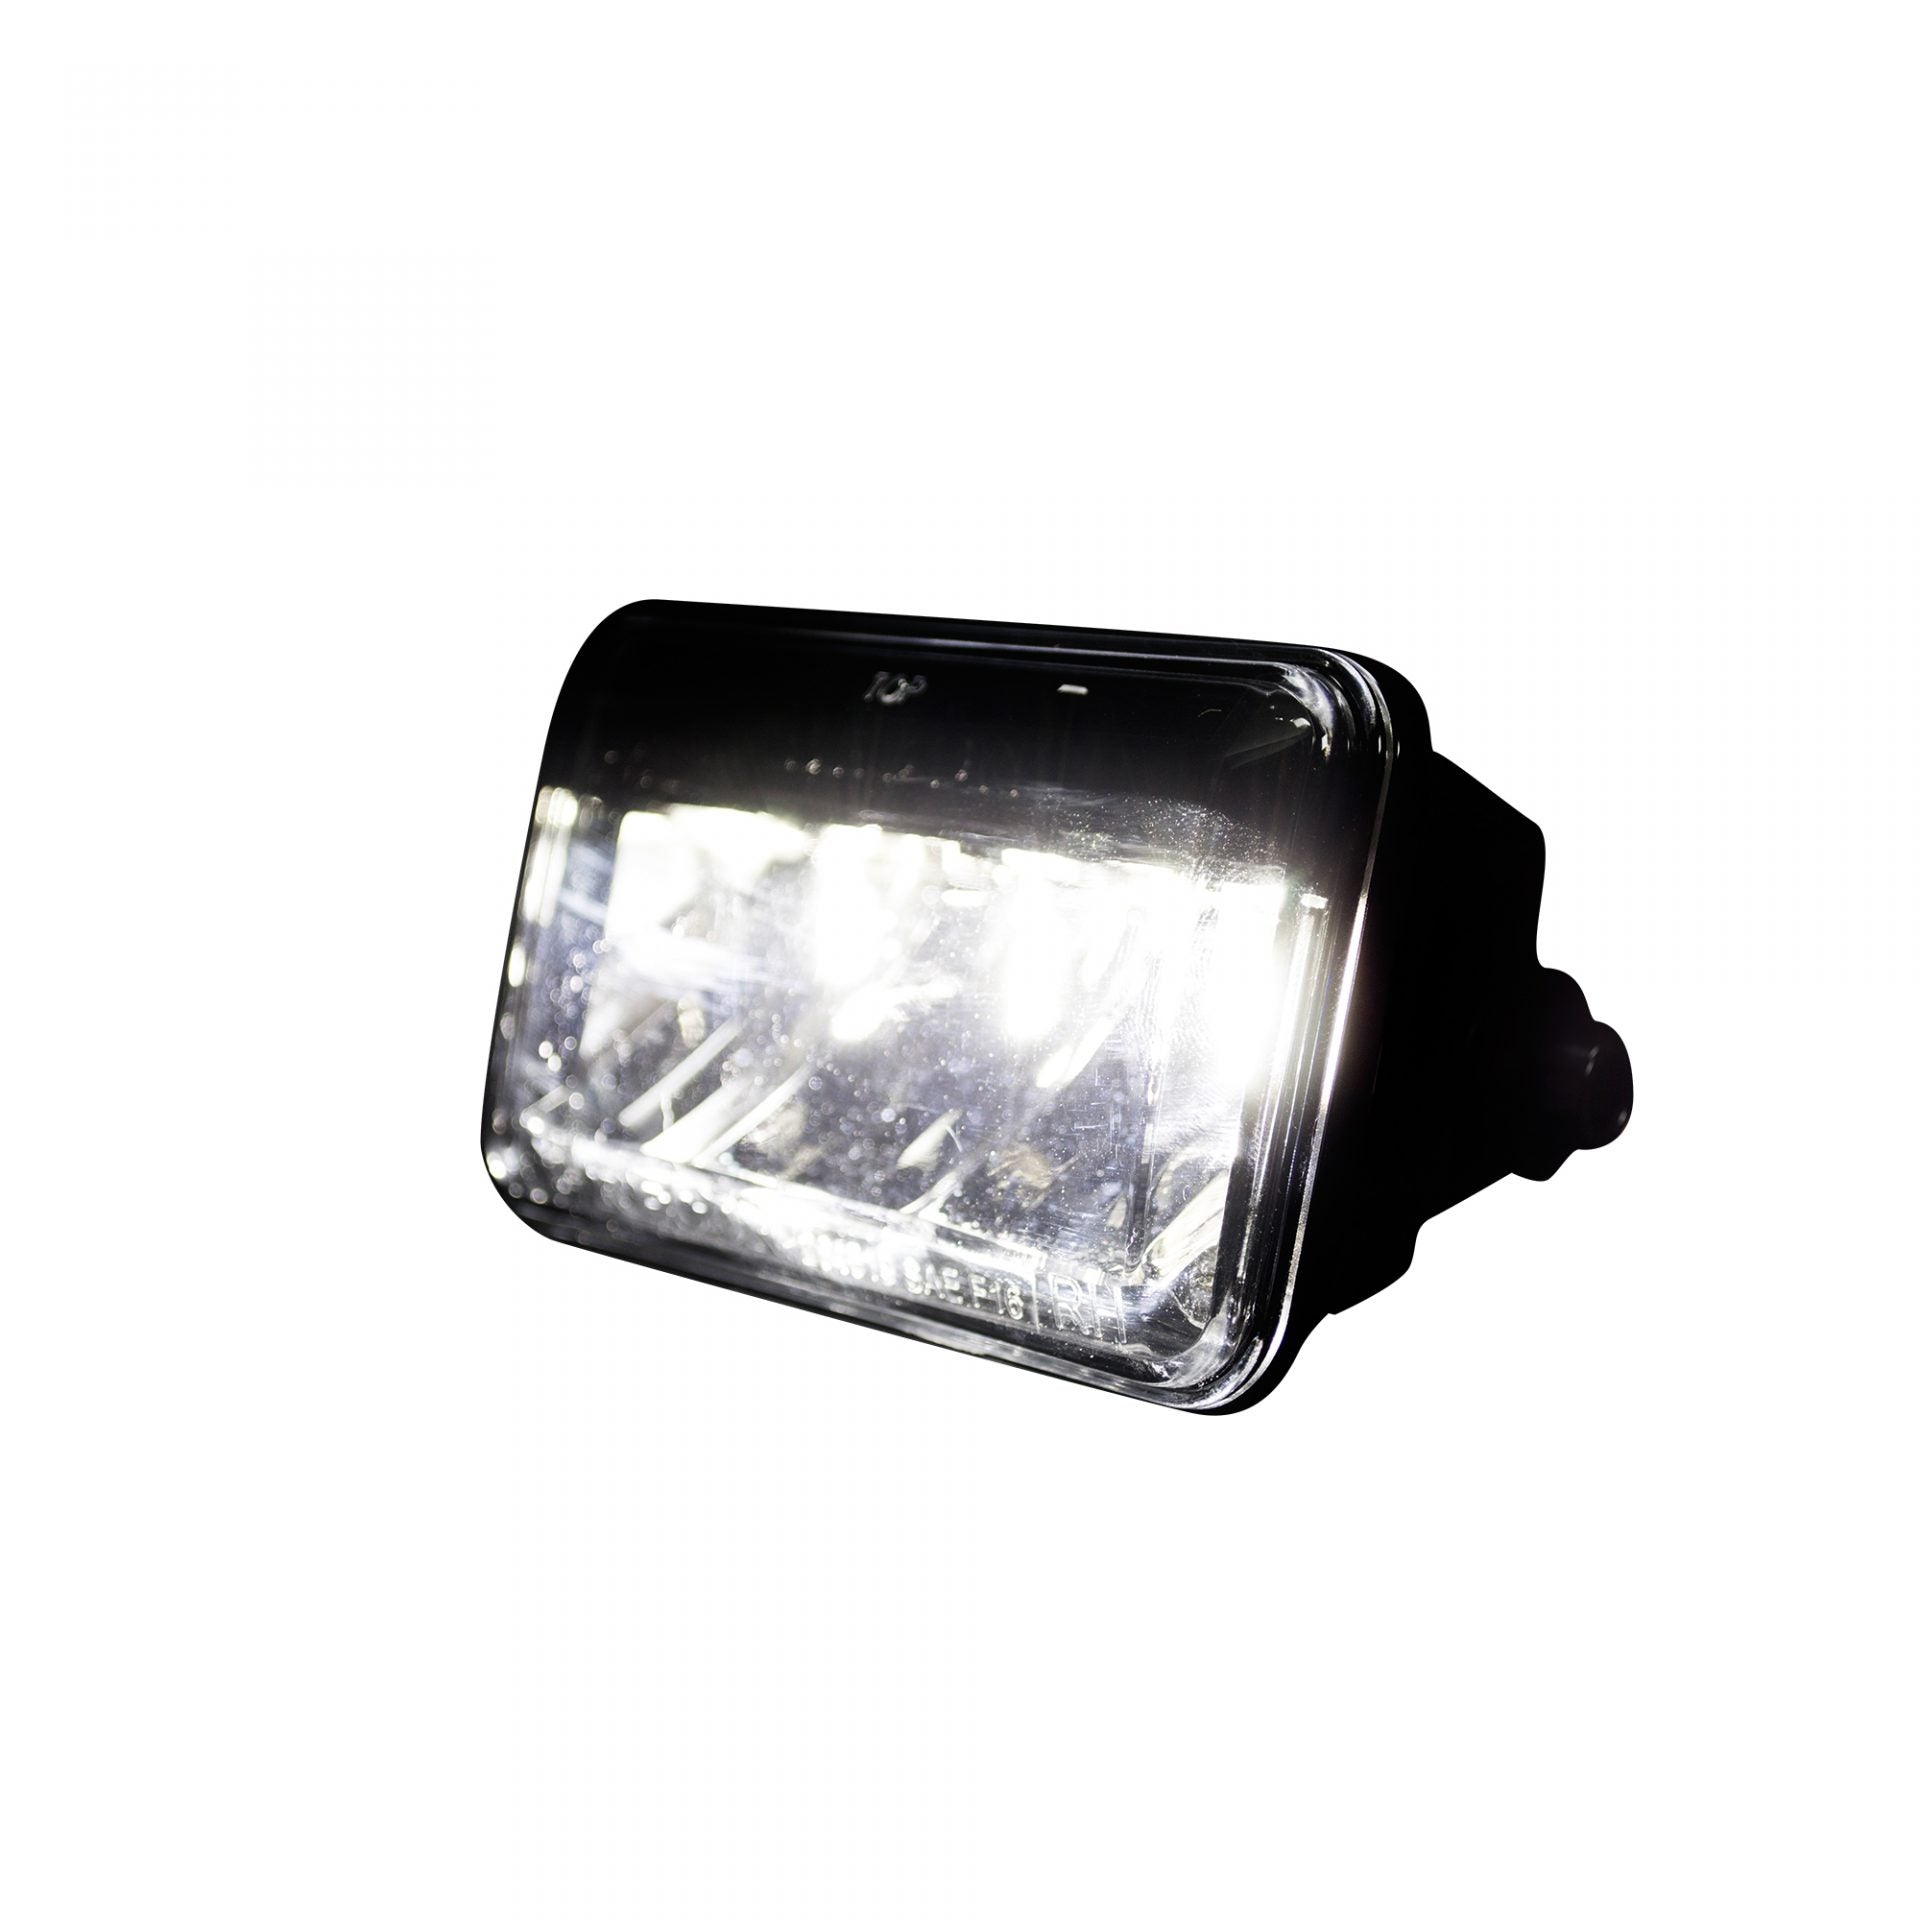 Ford F-150 LED Lights & Accessories | Purchase Here